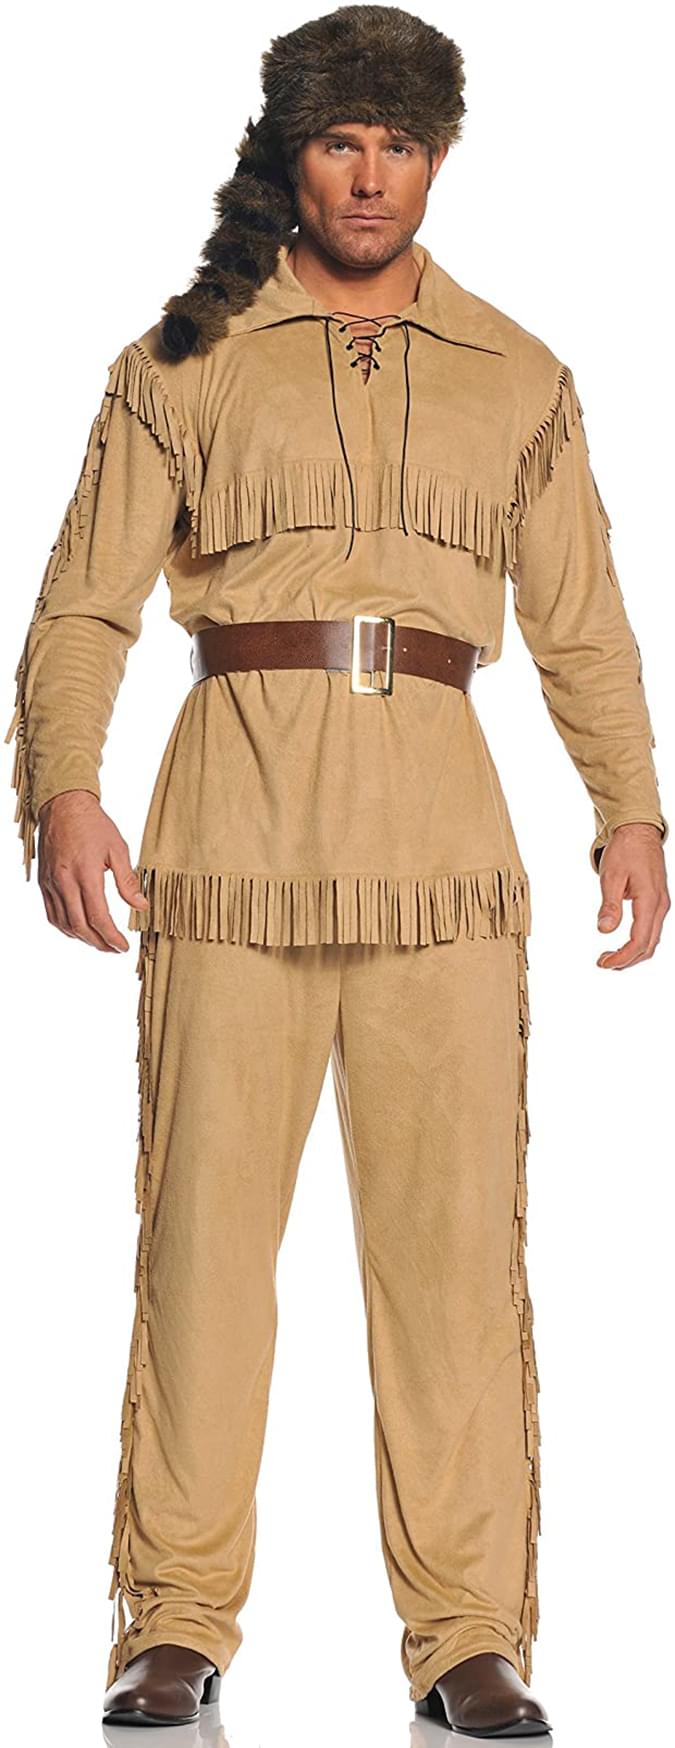 Frontier Man Adult Costume: One Size